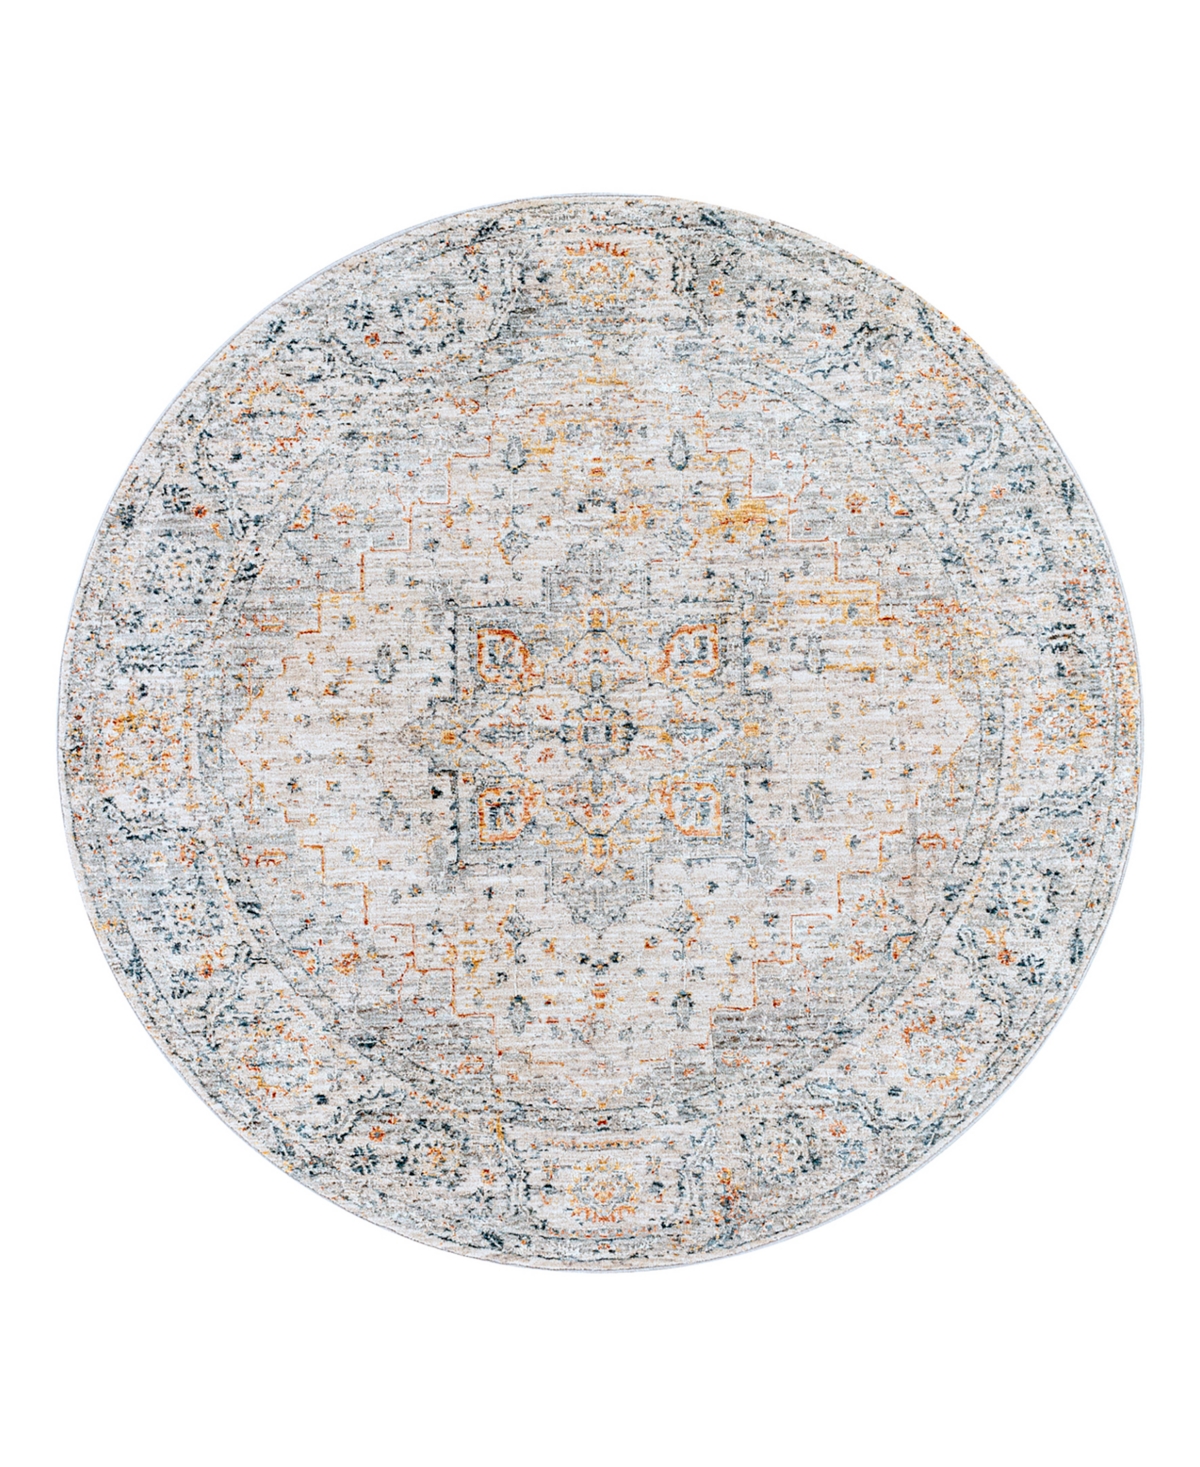 Shop Surya Laila Laa-2312 6'7x6'7 Round Area Rug In Silver